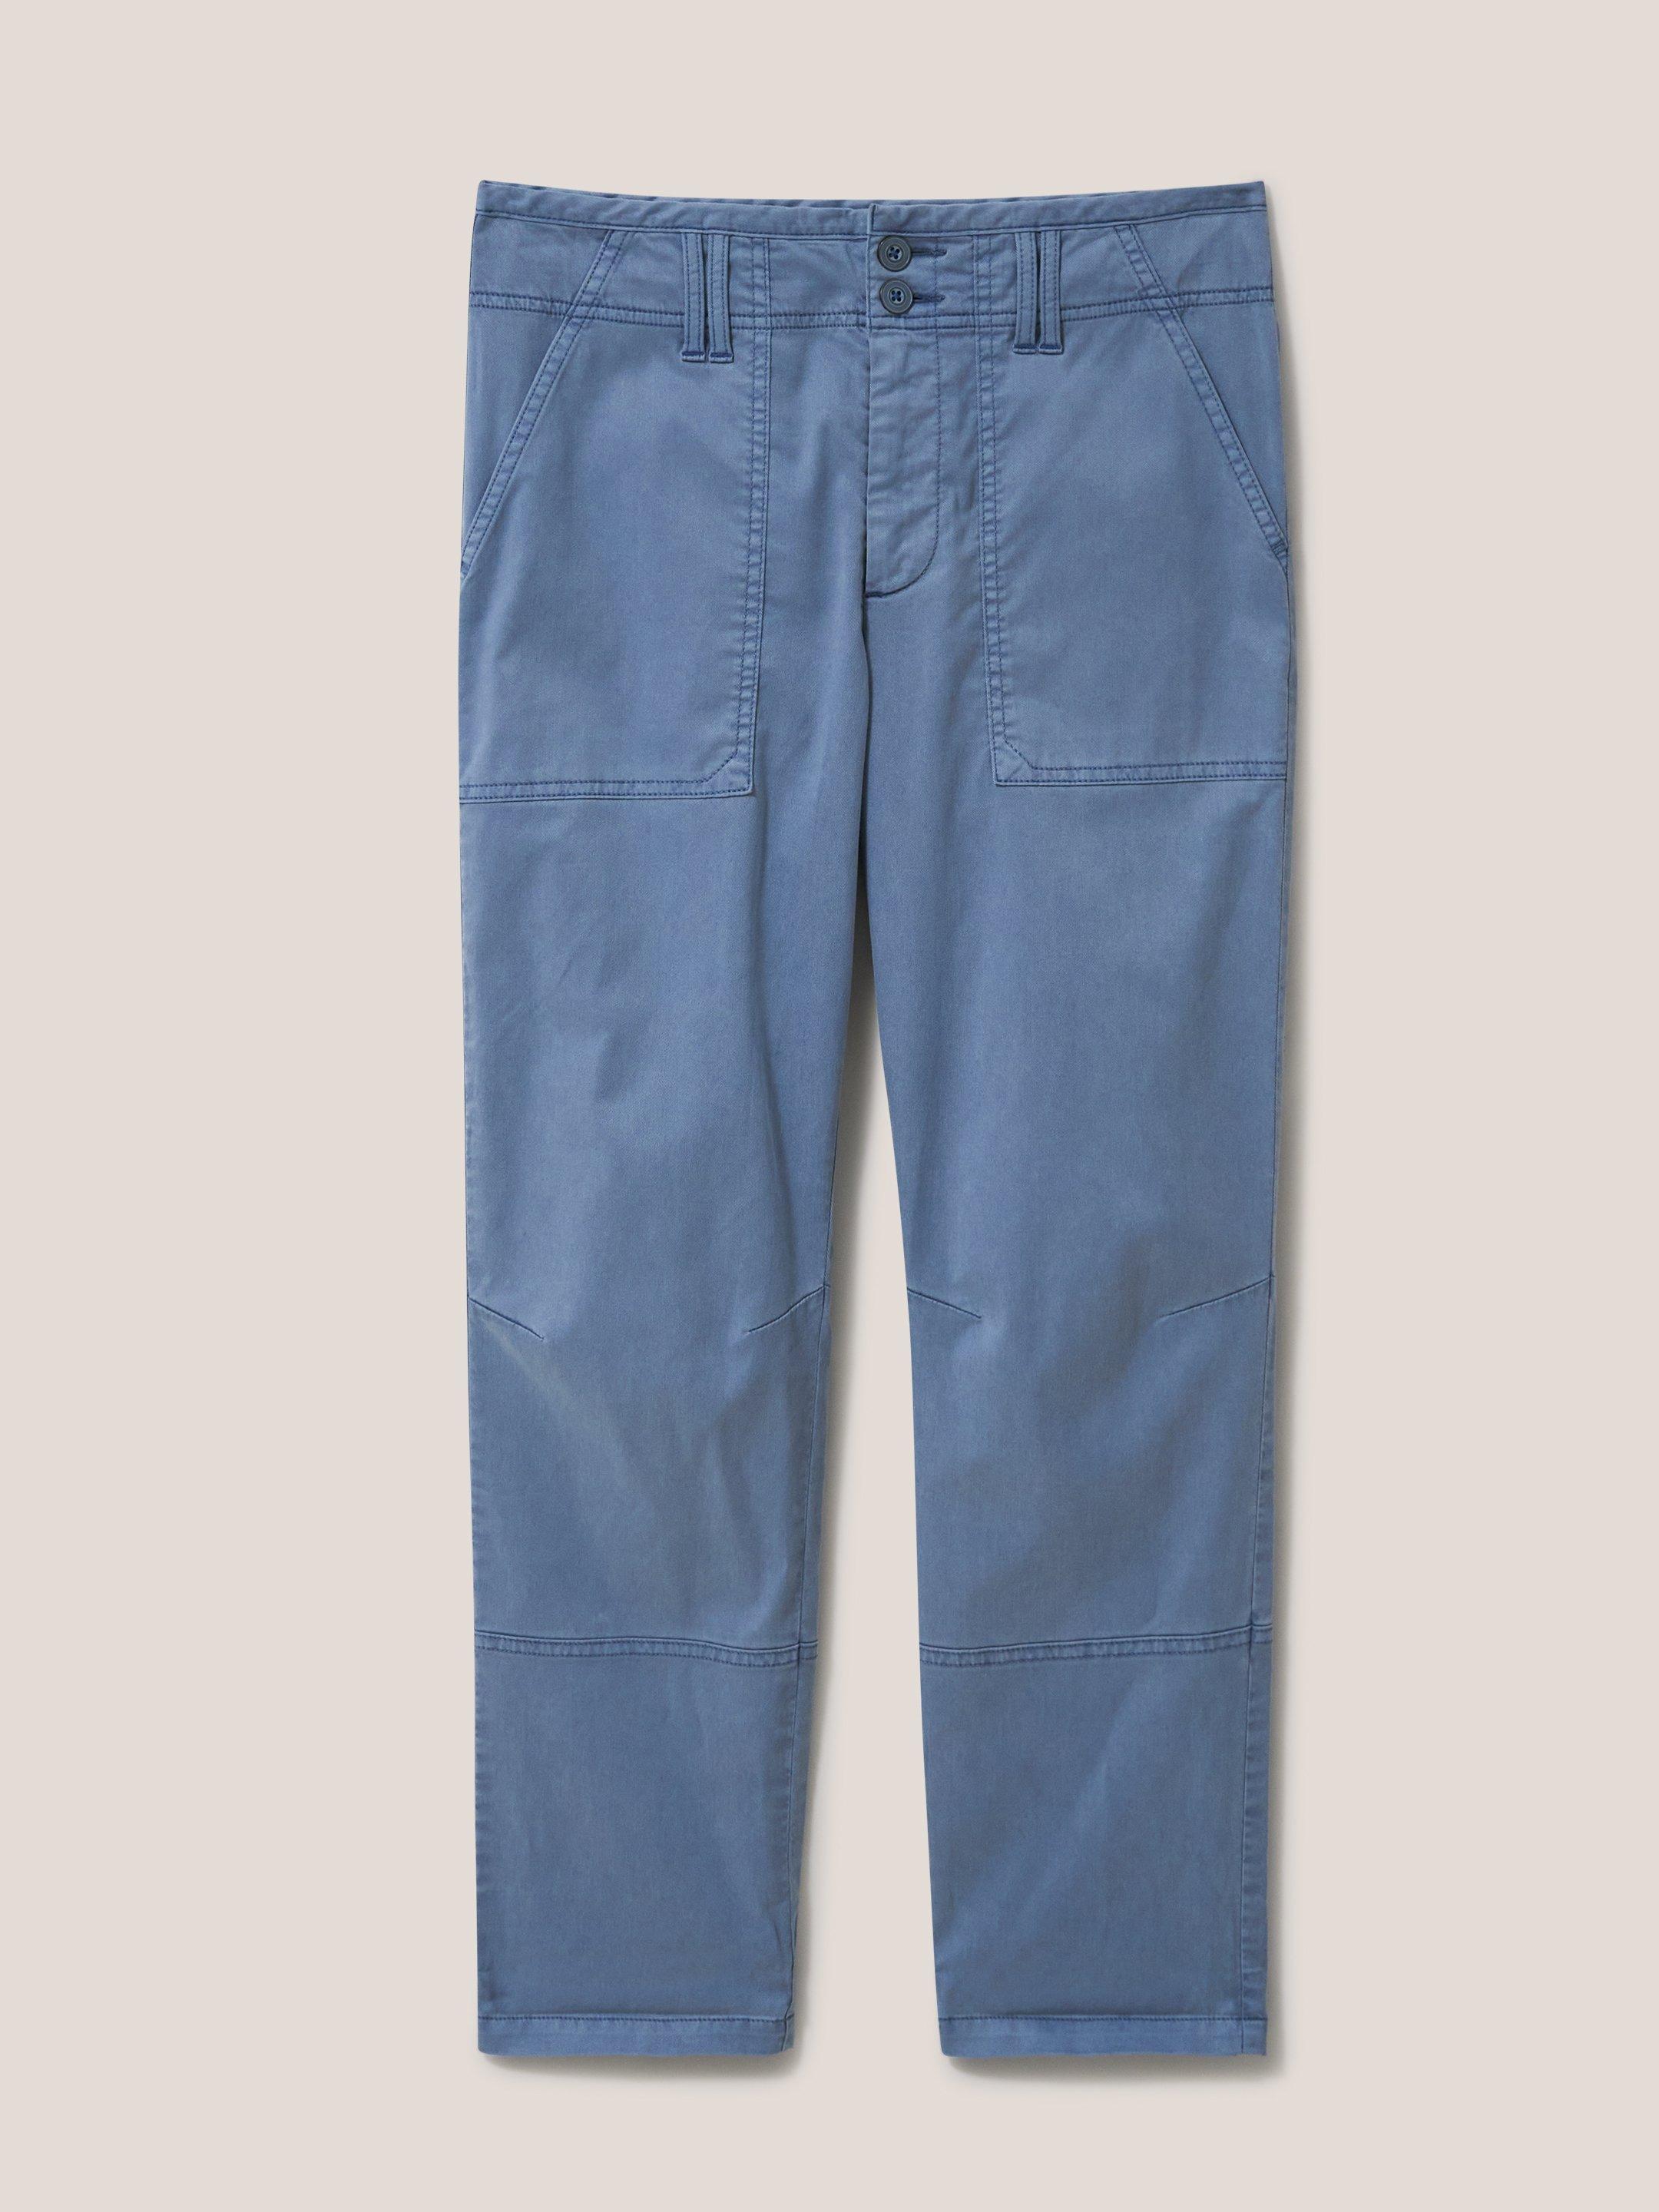 Blaire Trouser in LGT BLUE - FLAT FRONT